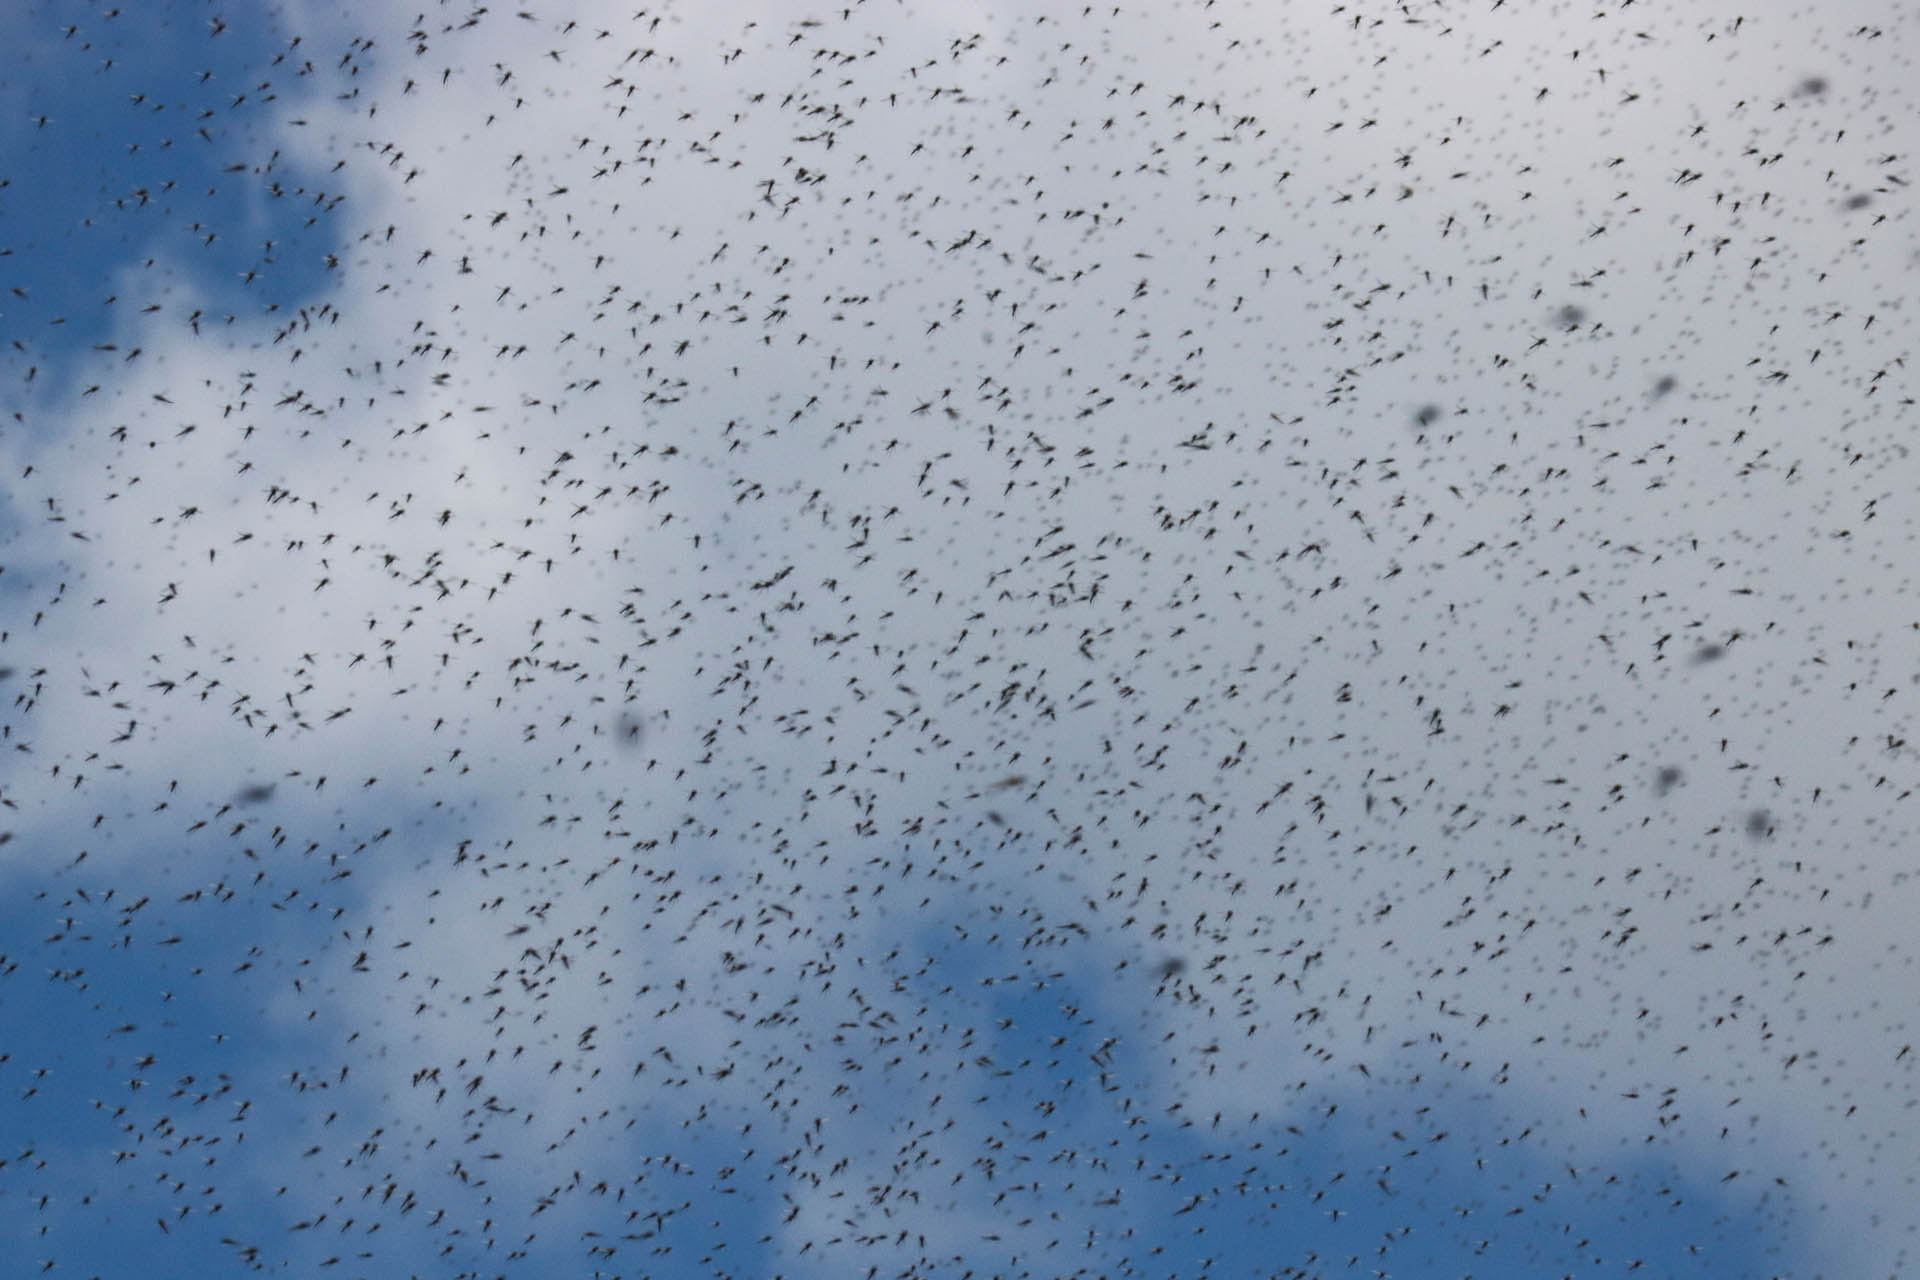 Swarm of gnats in the sky